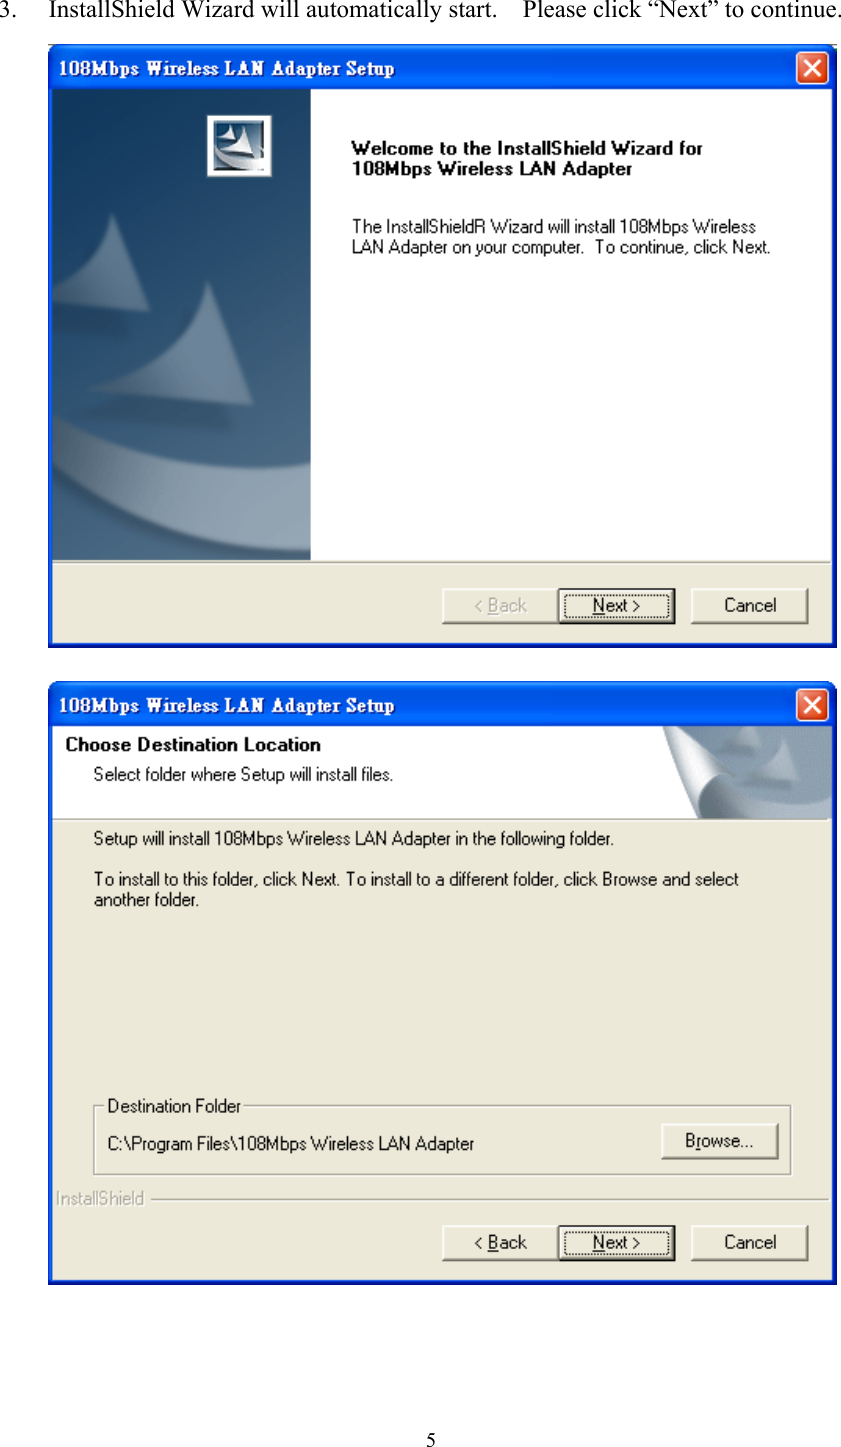  5 3.  InstallShield Wizard will automatically start.    Please click “Next” to continue.    